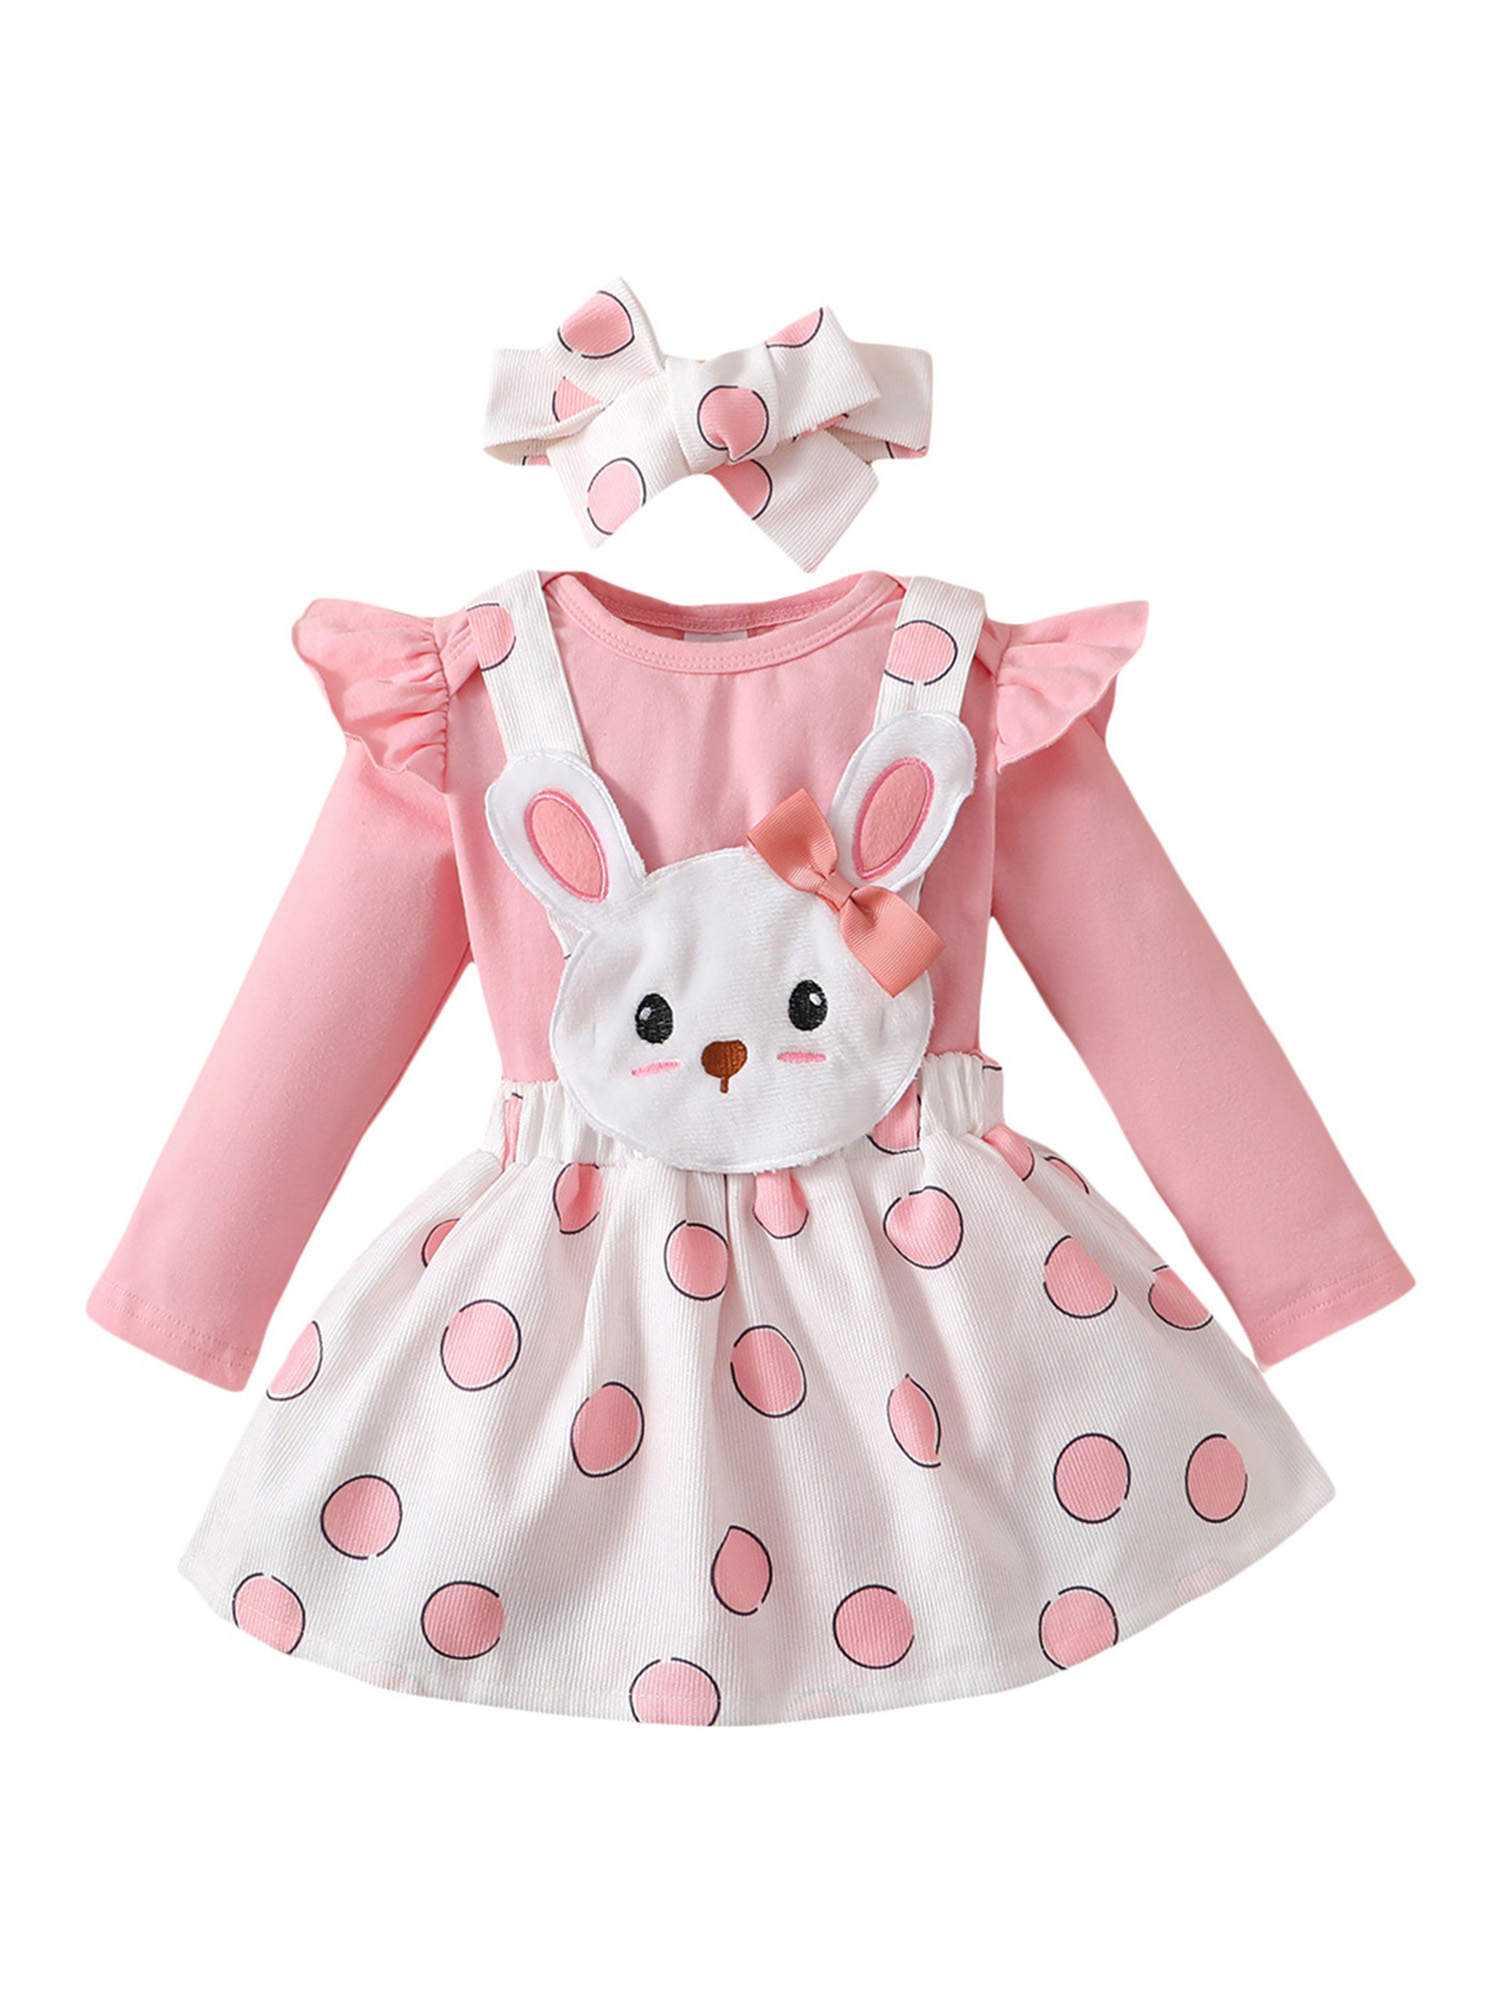 jaweiwi Newborn Baby Girl Pink Bunny Outfit Long Sleeve Romper Rabbit ...